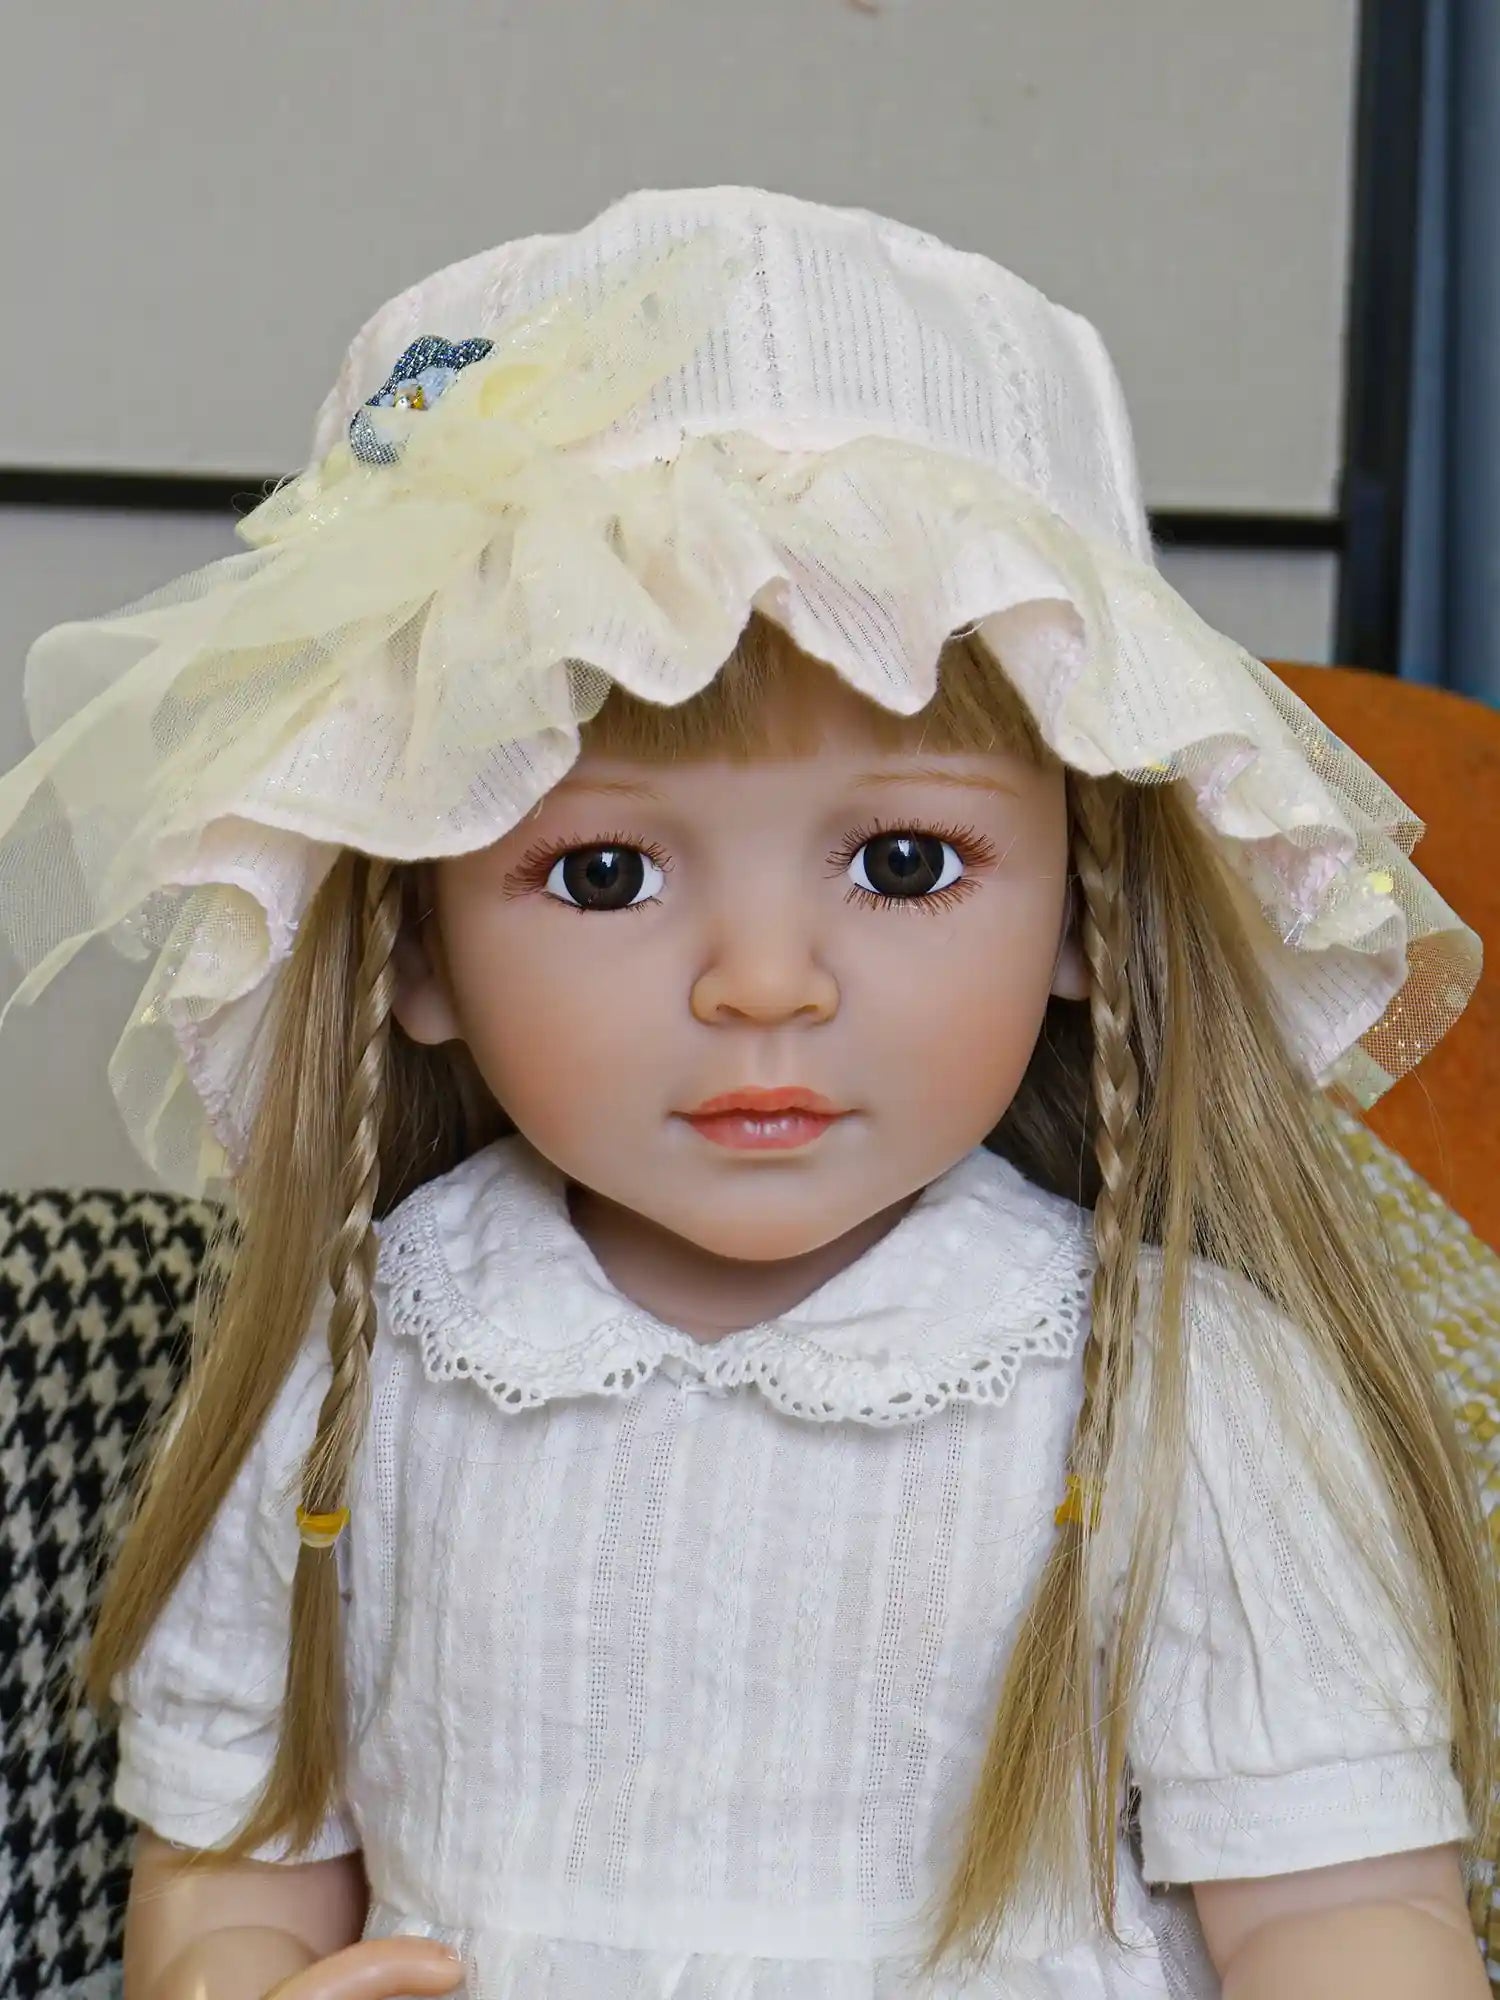 Realistic doll featuring braids and a yellow sunhat, posed on a chair with vibrant geometric cushions in the background.